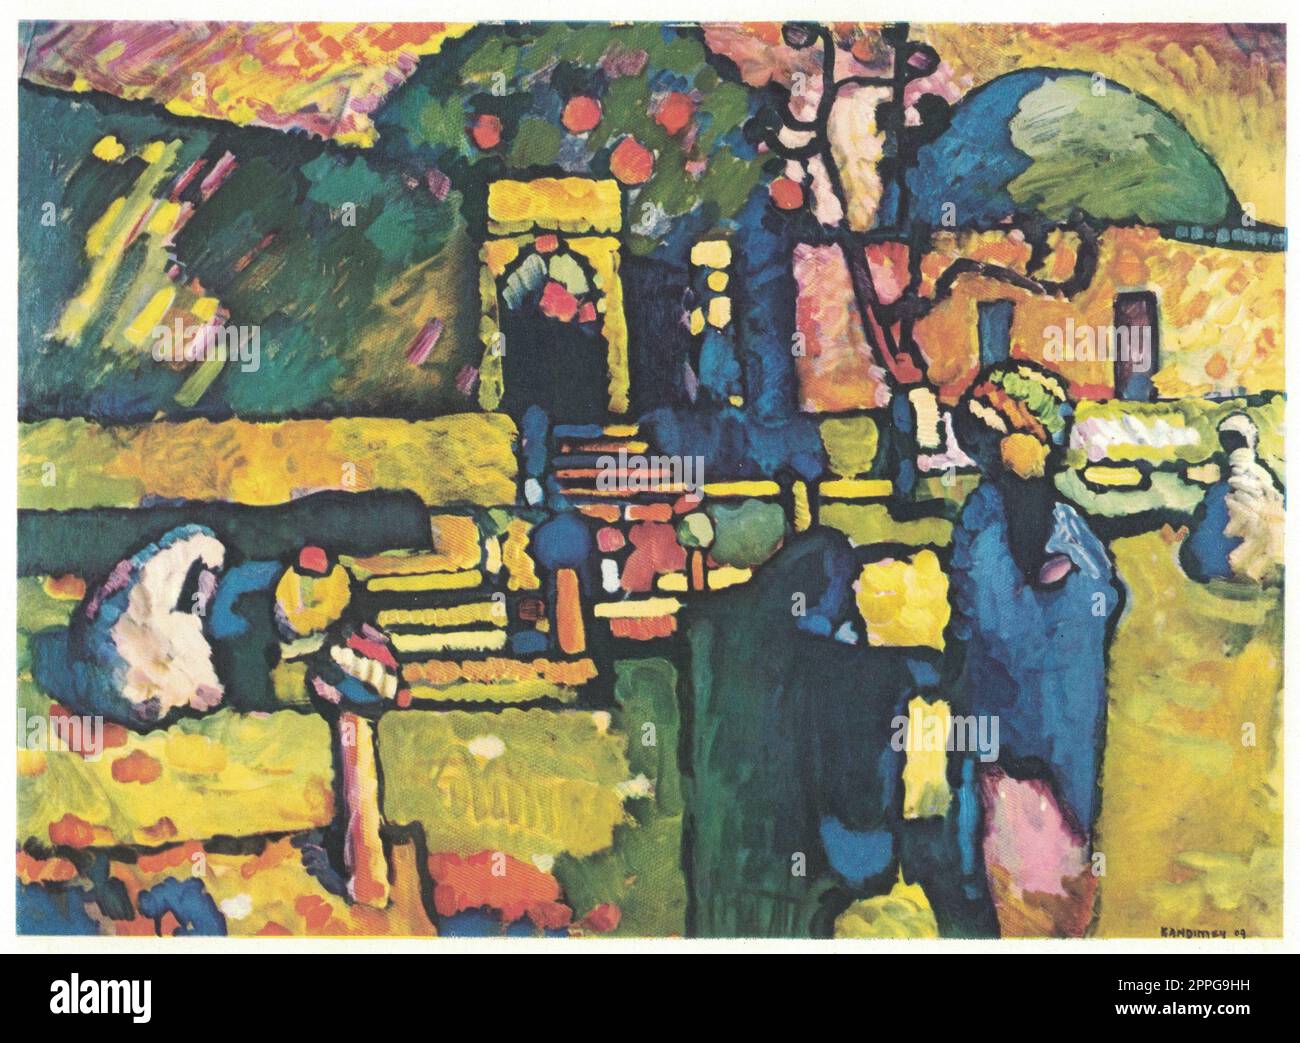 Arabs (Cemetery), 1909. Painting by Wassily Kandinsky. Stock Photo